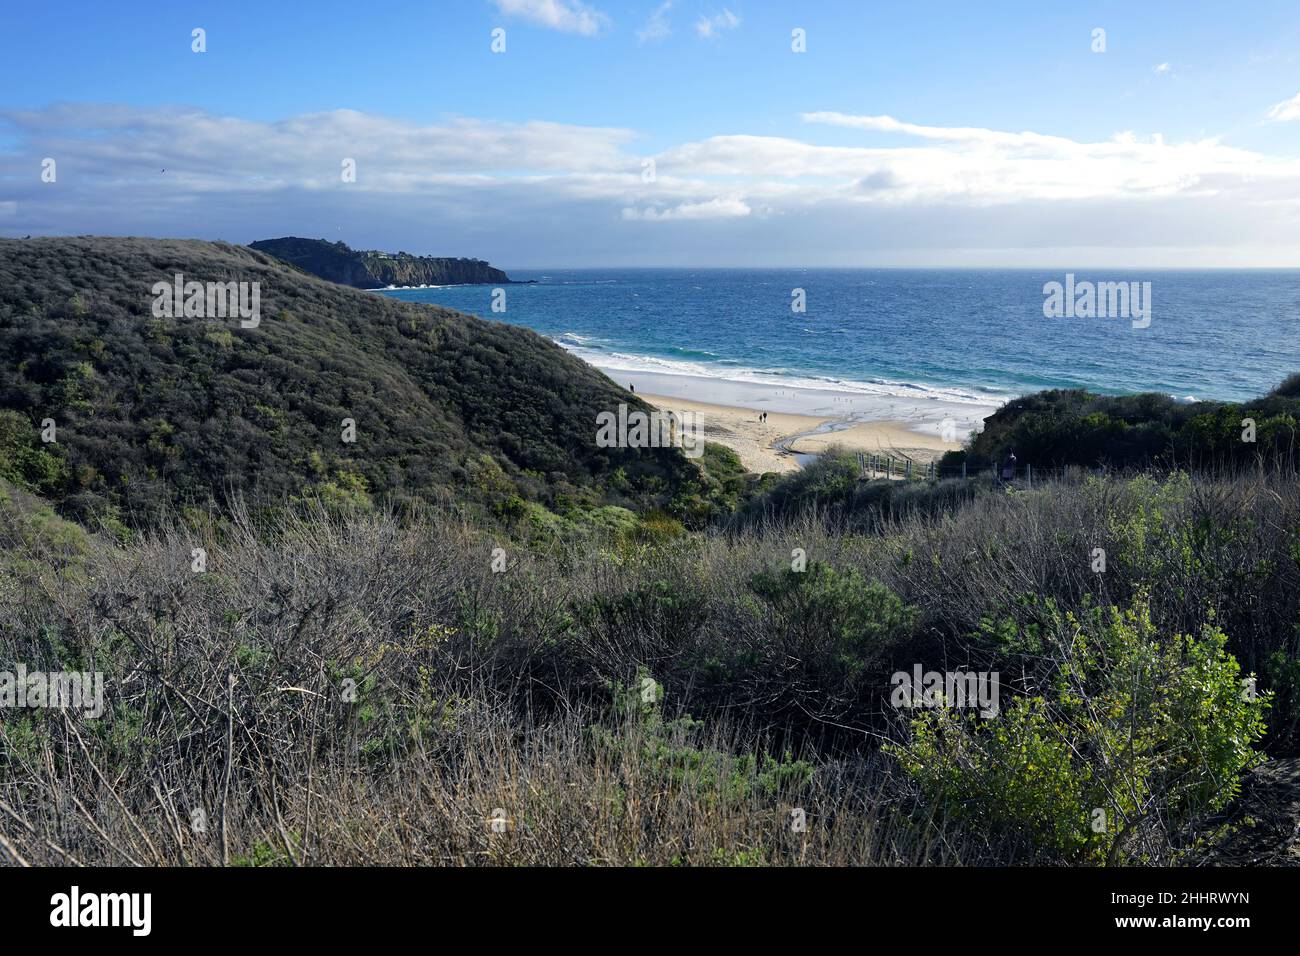 The view of the shore with green hills and the sea in the background. California Coast. Stock Photo